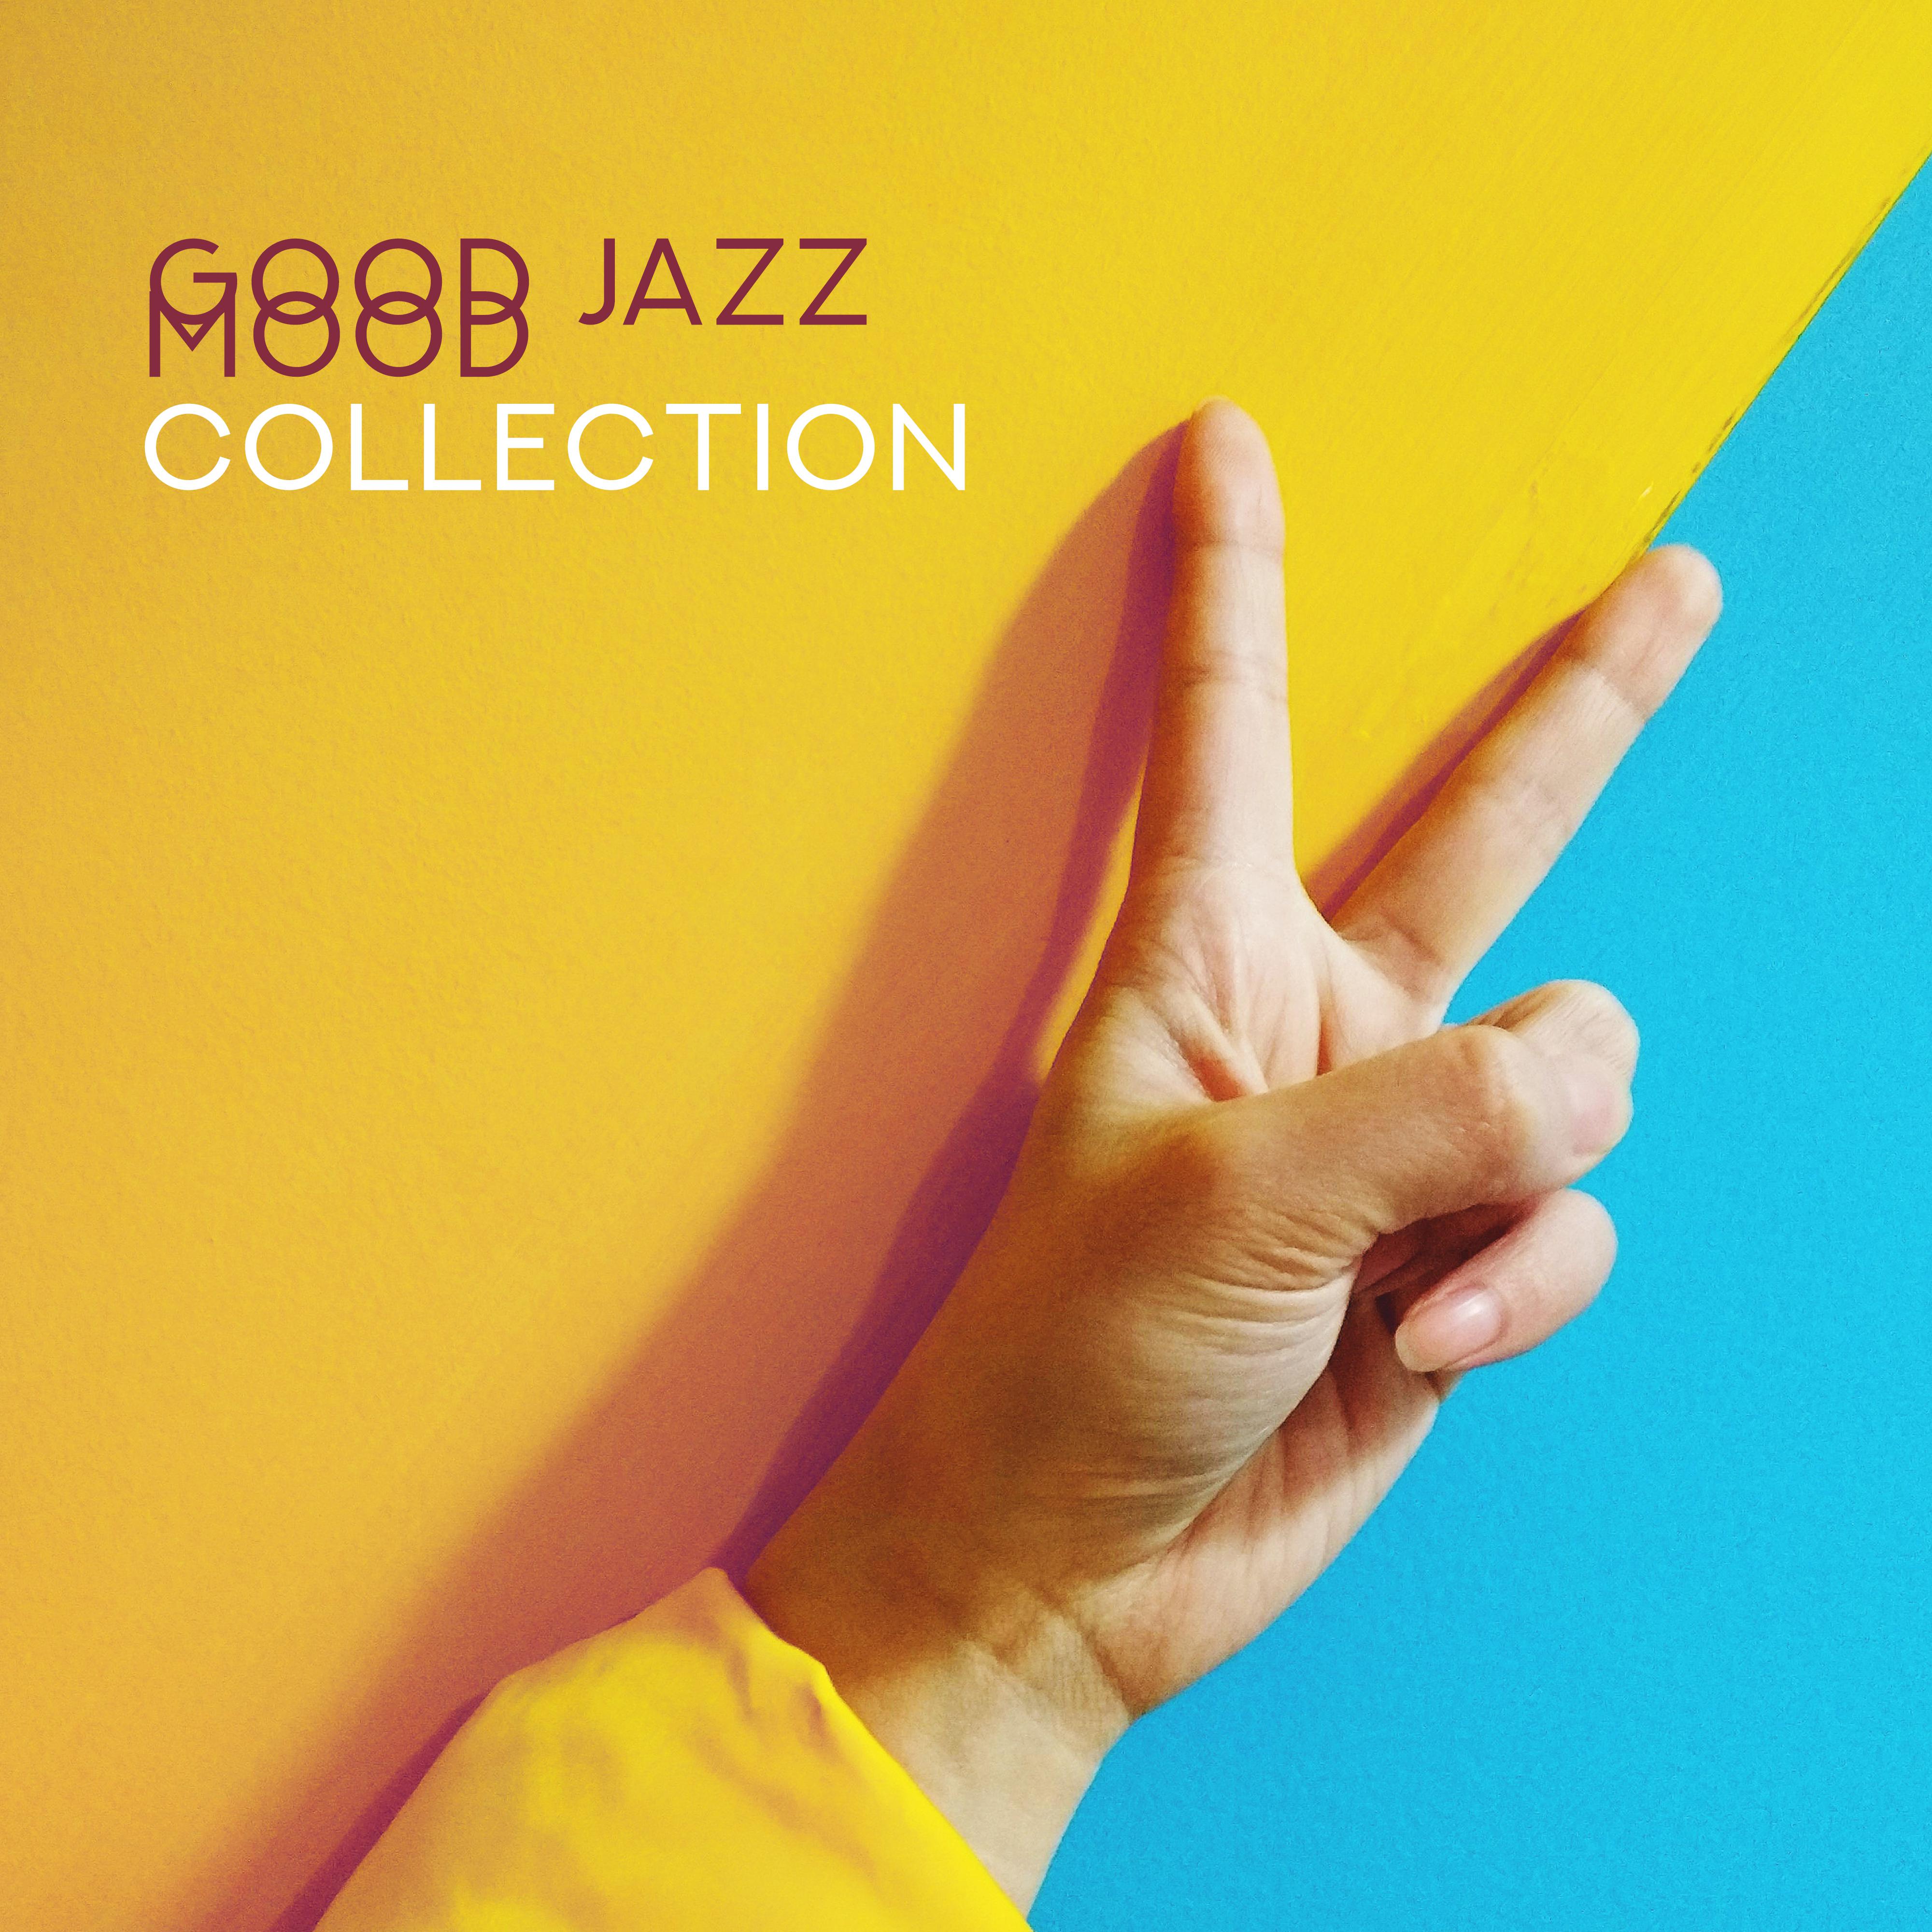 Good Jazz Mood Collection – Instrumental Smooth Melodies for Positive Thinking & Good Humor